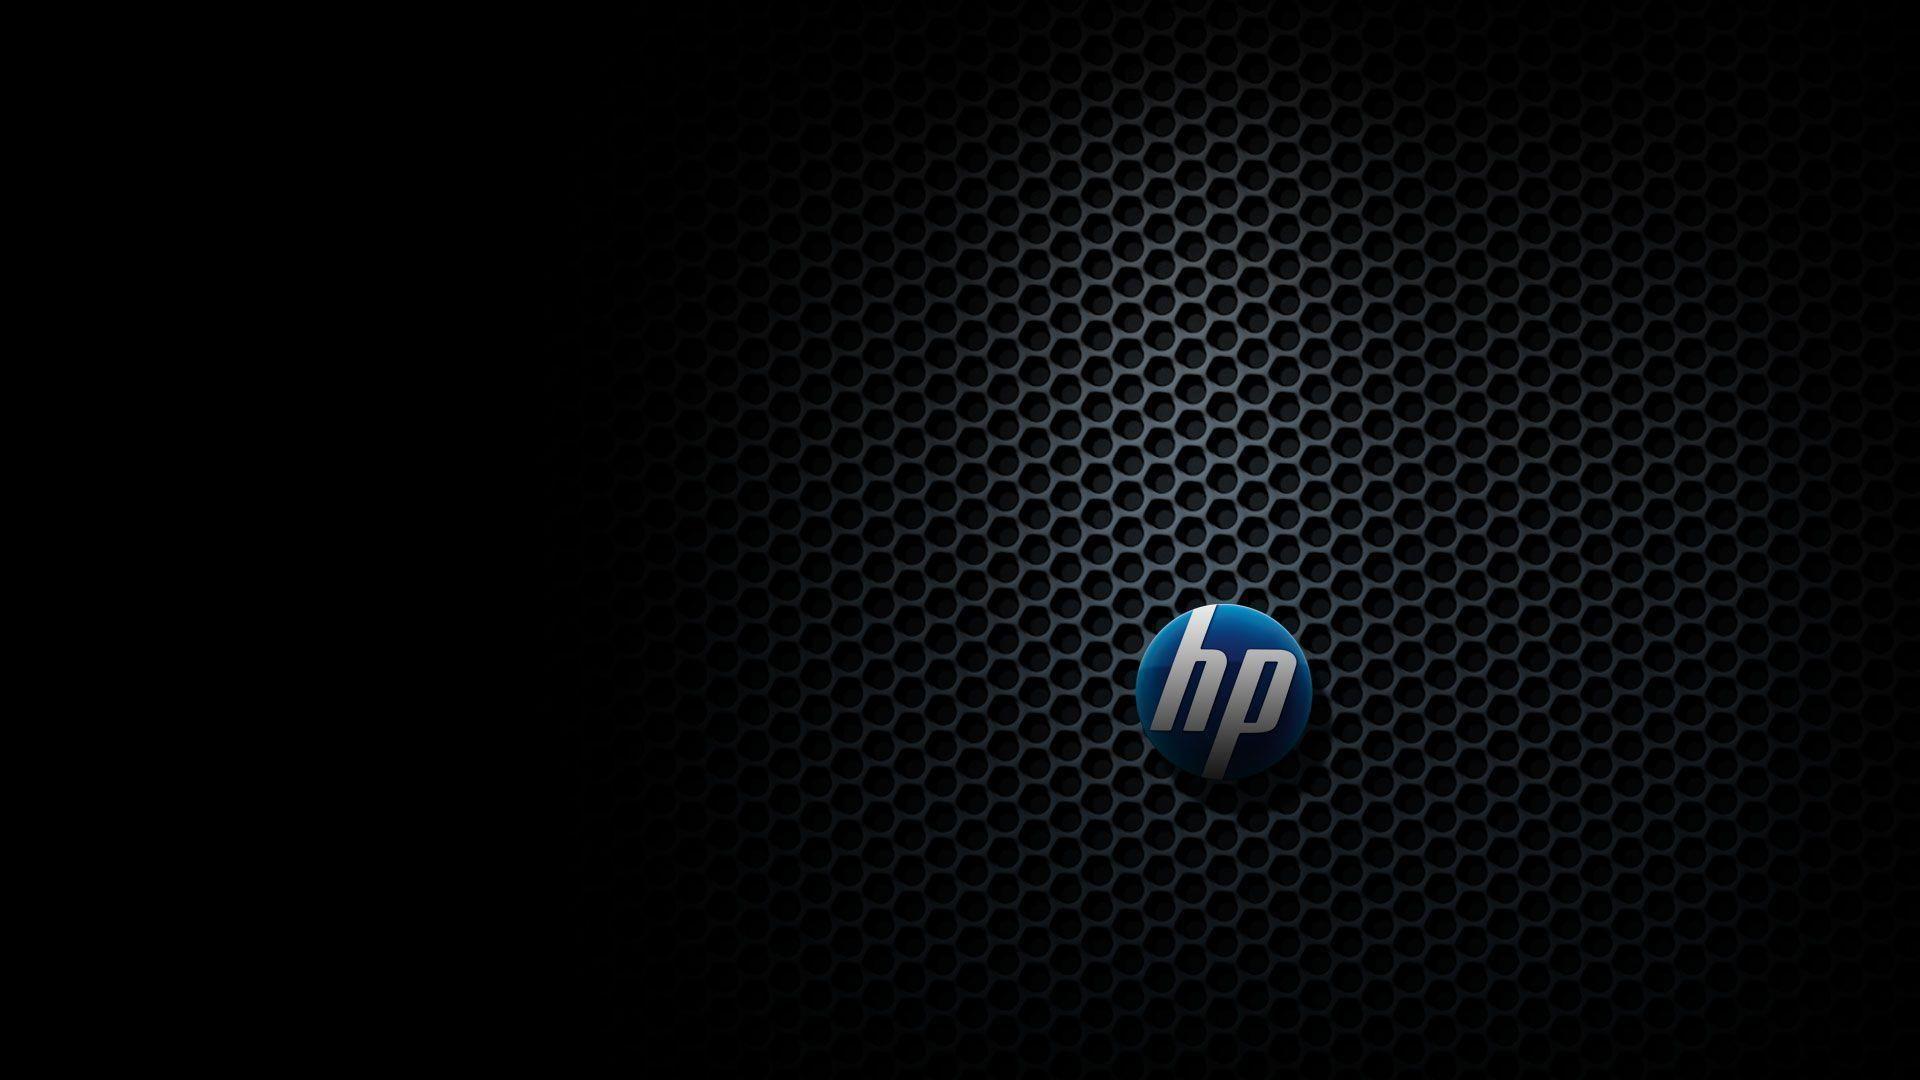 Hp Cool Hd Wallpapers Top Free Hp Cool Hd Backgrounds Wallpaperaccess